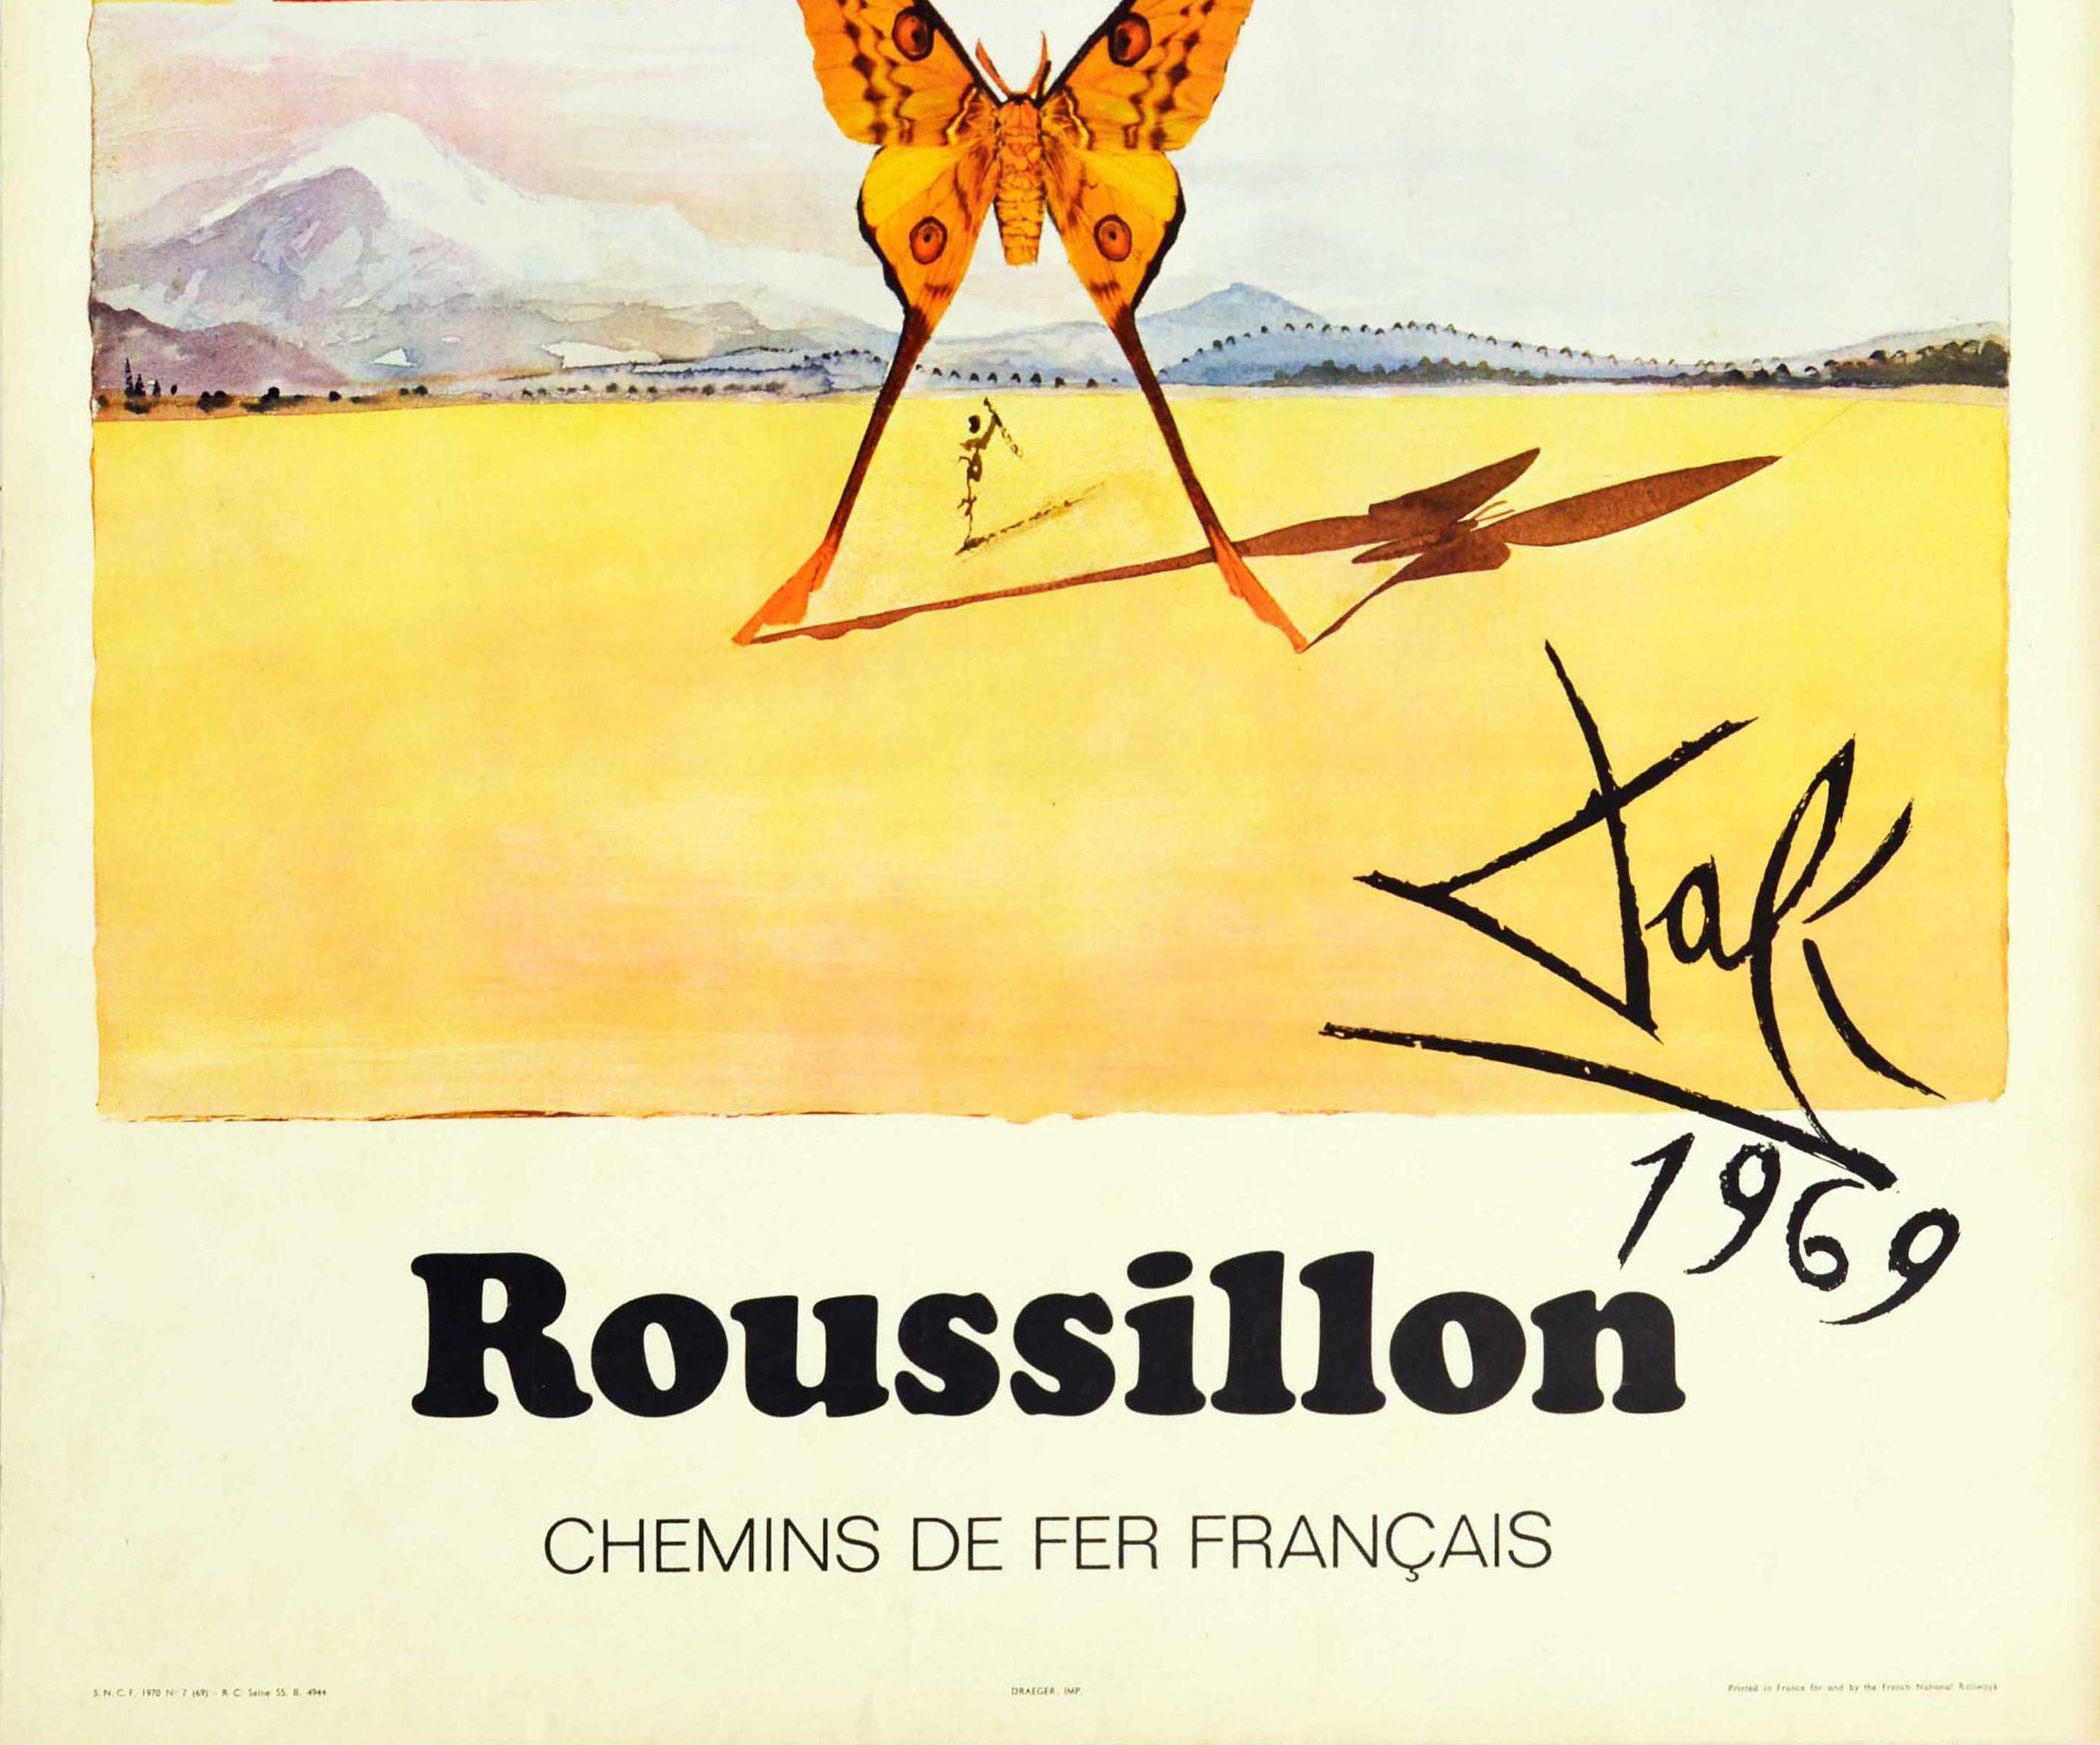 French Original Vintage Railway Travel Poster Roussillon Dali Surrealism Butterfly Art